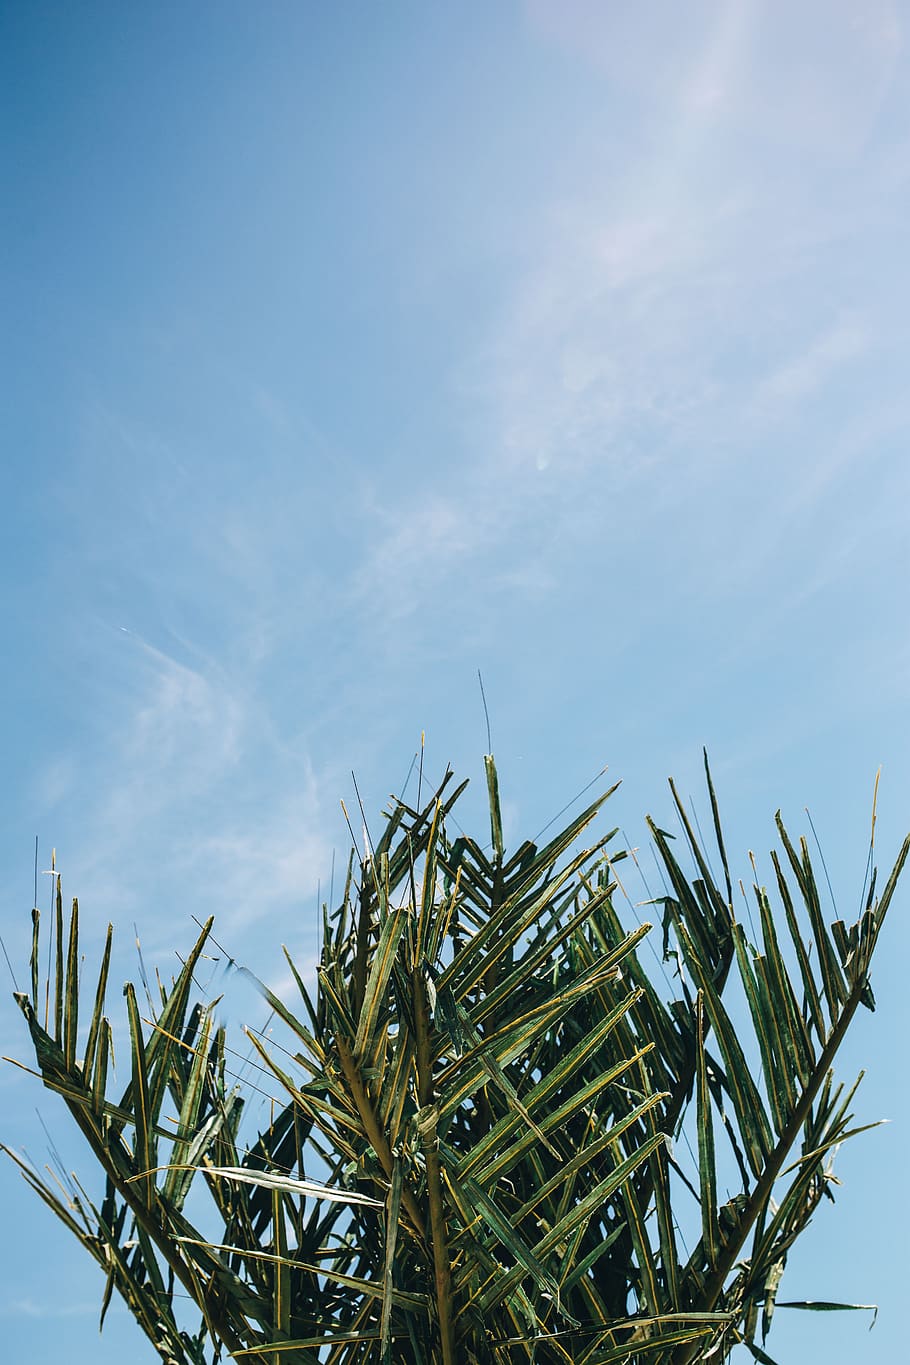 summer, nature, sky, leaf, leaves, tree, outdoors, tropical, sago palm, palm